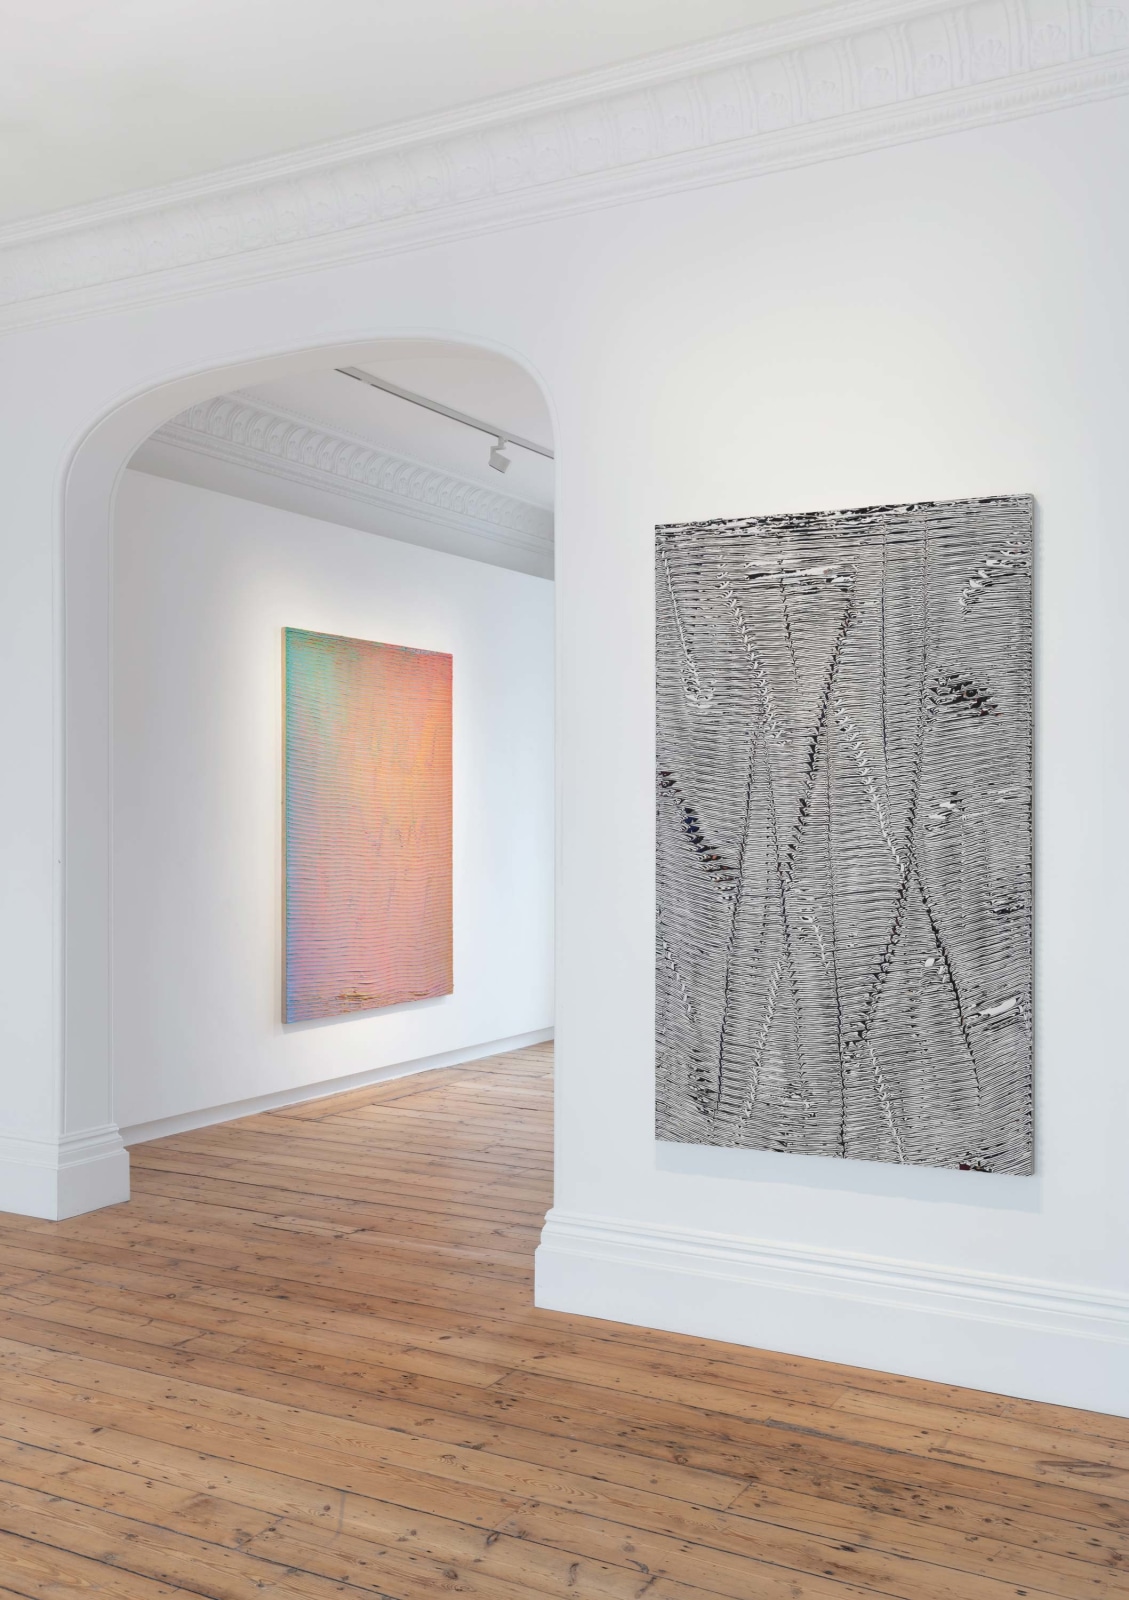 Loriel Beltr&aacute;n:&nbsp;To Name the Light, Installation View